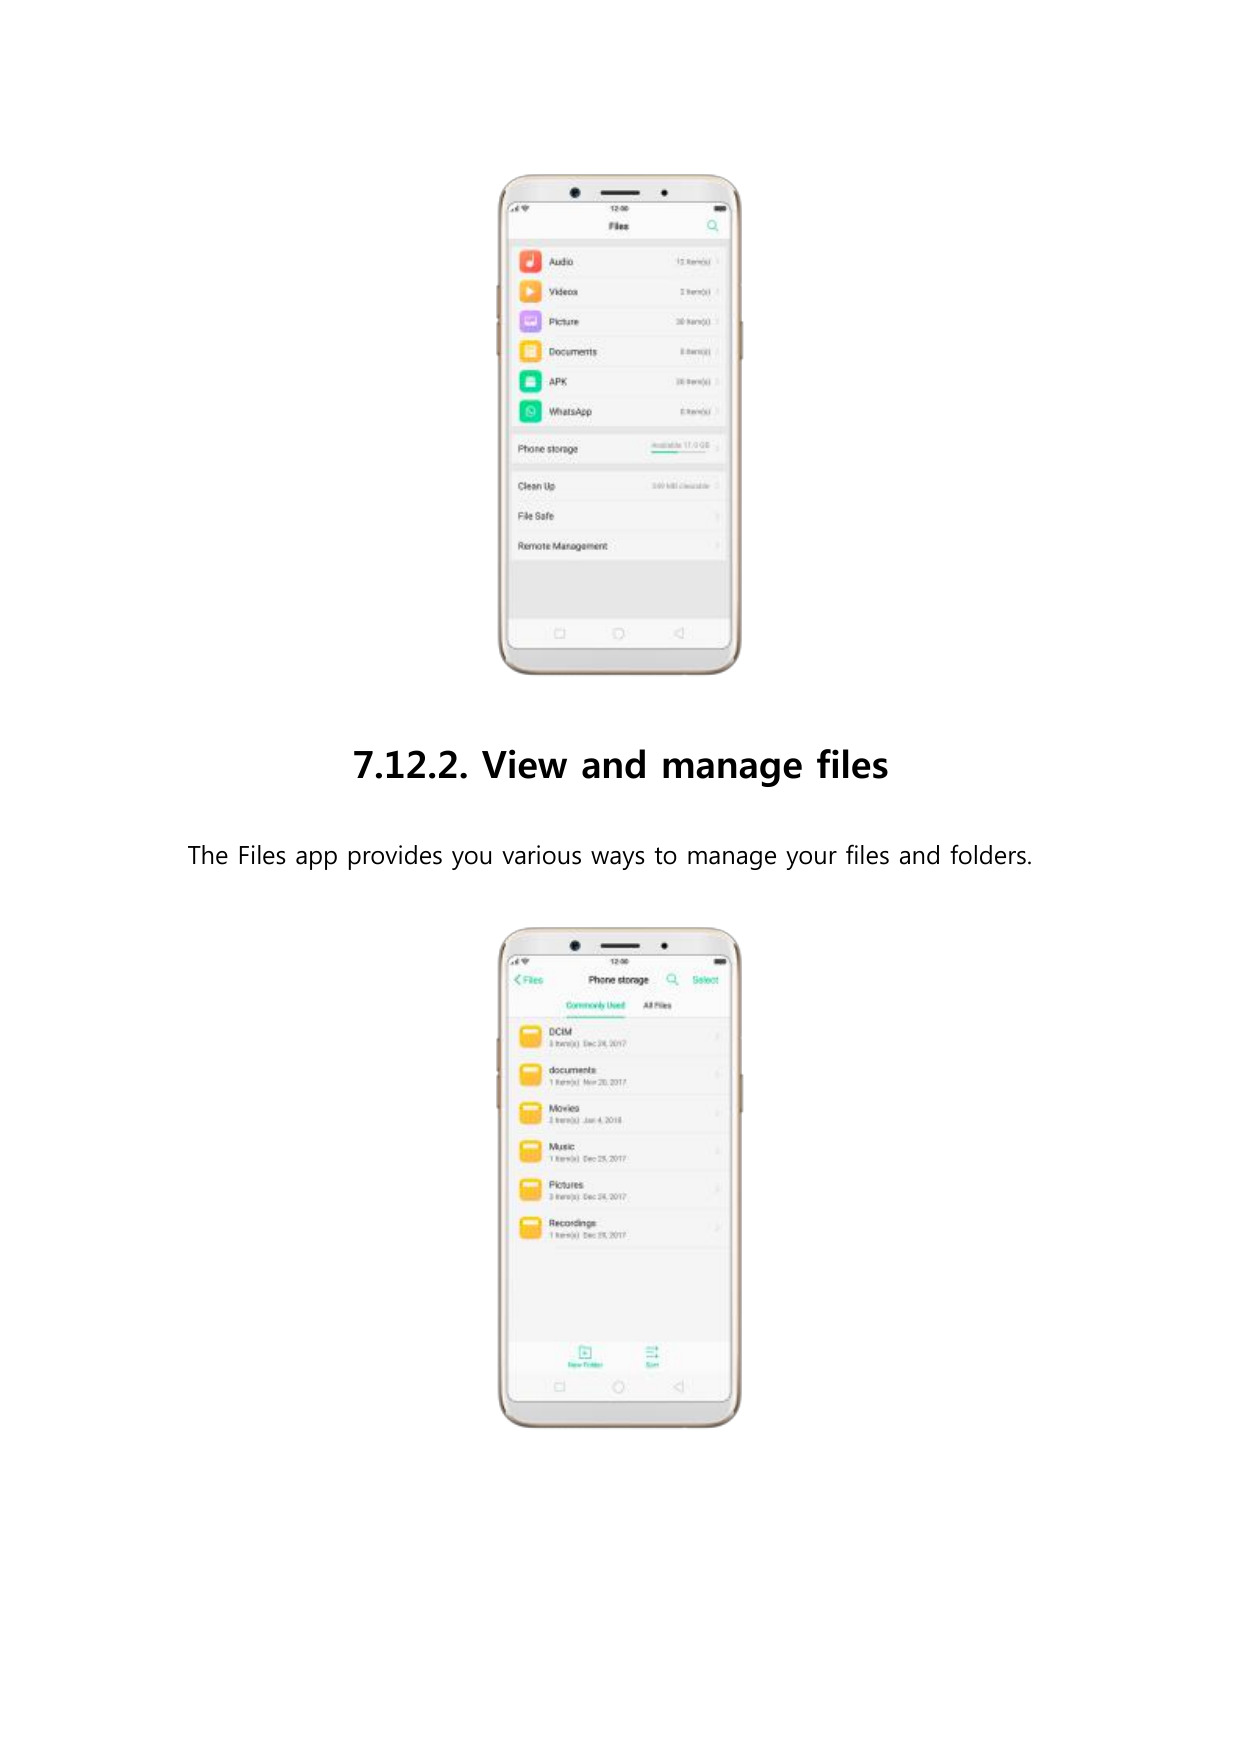 7.12.2. View and manage filesThe Files app provides you various ways to manage your files and folders.